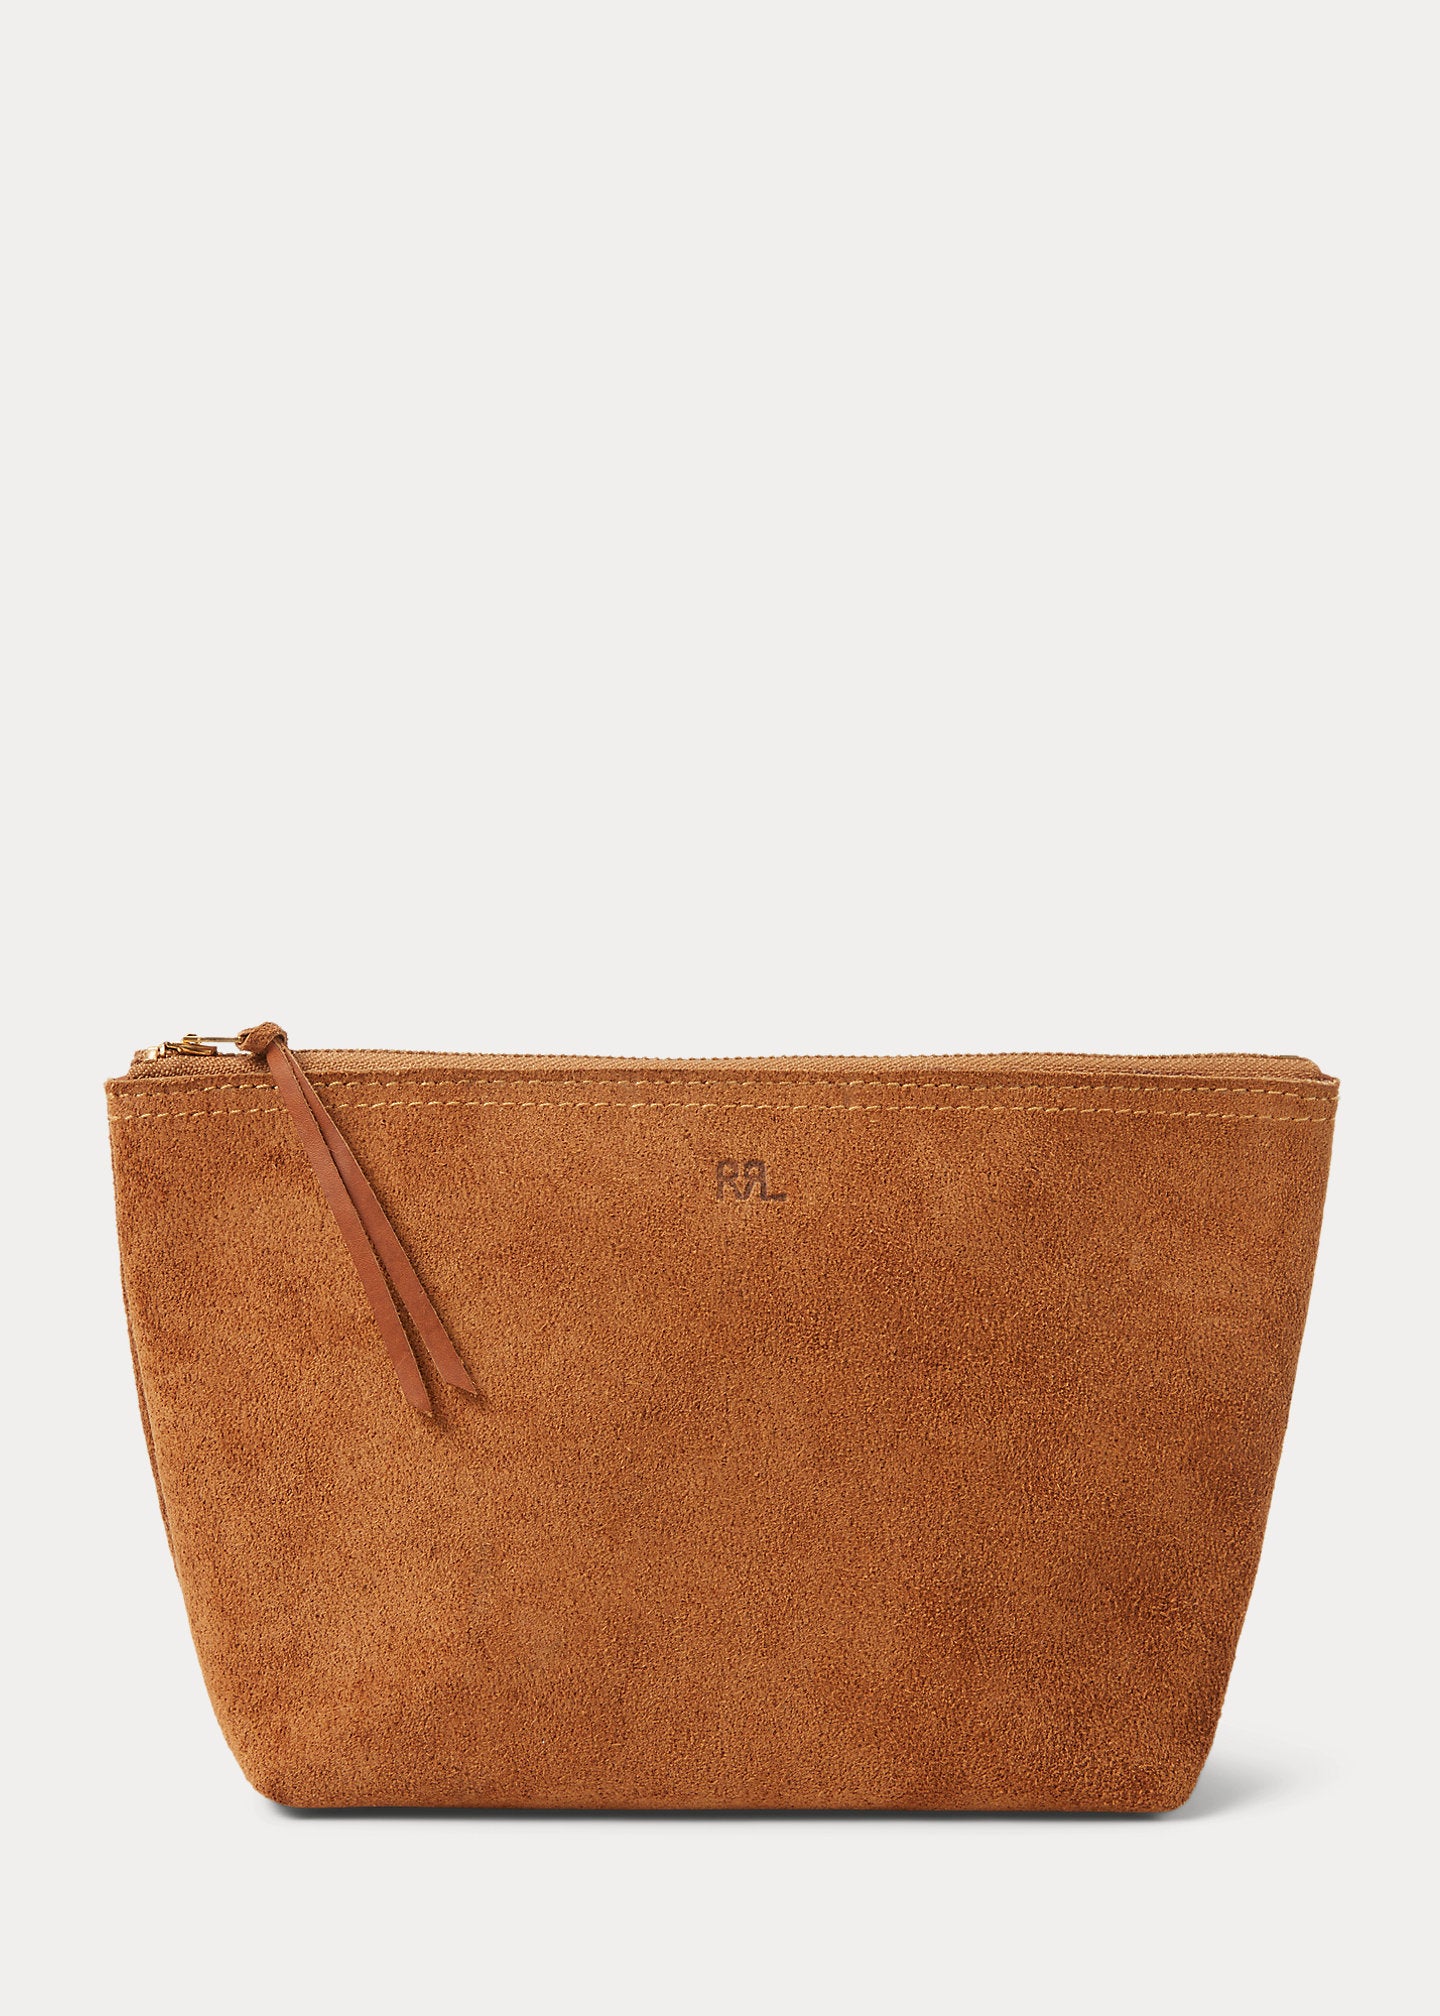 Tan Suede Jewelry Pouch